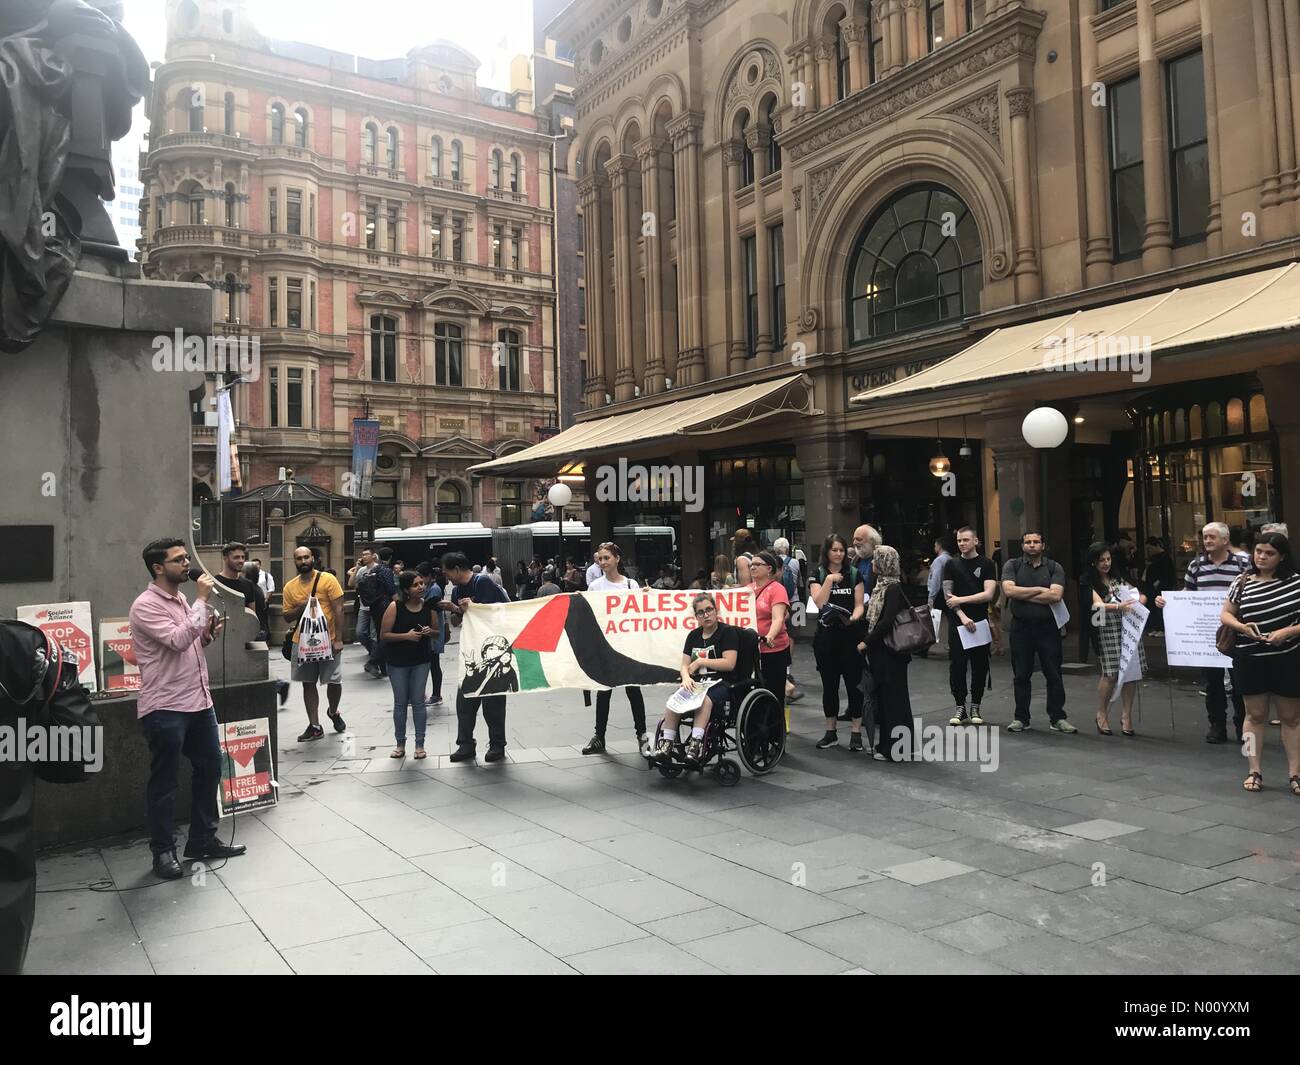 Sydney, Australia. 20th December, 2018. Palestine Action Group protest outside the Queen Victoria Building in Sydney against the move by Australian Prime Minister Scott Morrison's move to recognise Jerusalem as the capital of Israel. Credit: Richard Milnes/StockimoNews/Alamy Live News Stock Photo